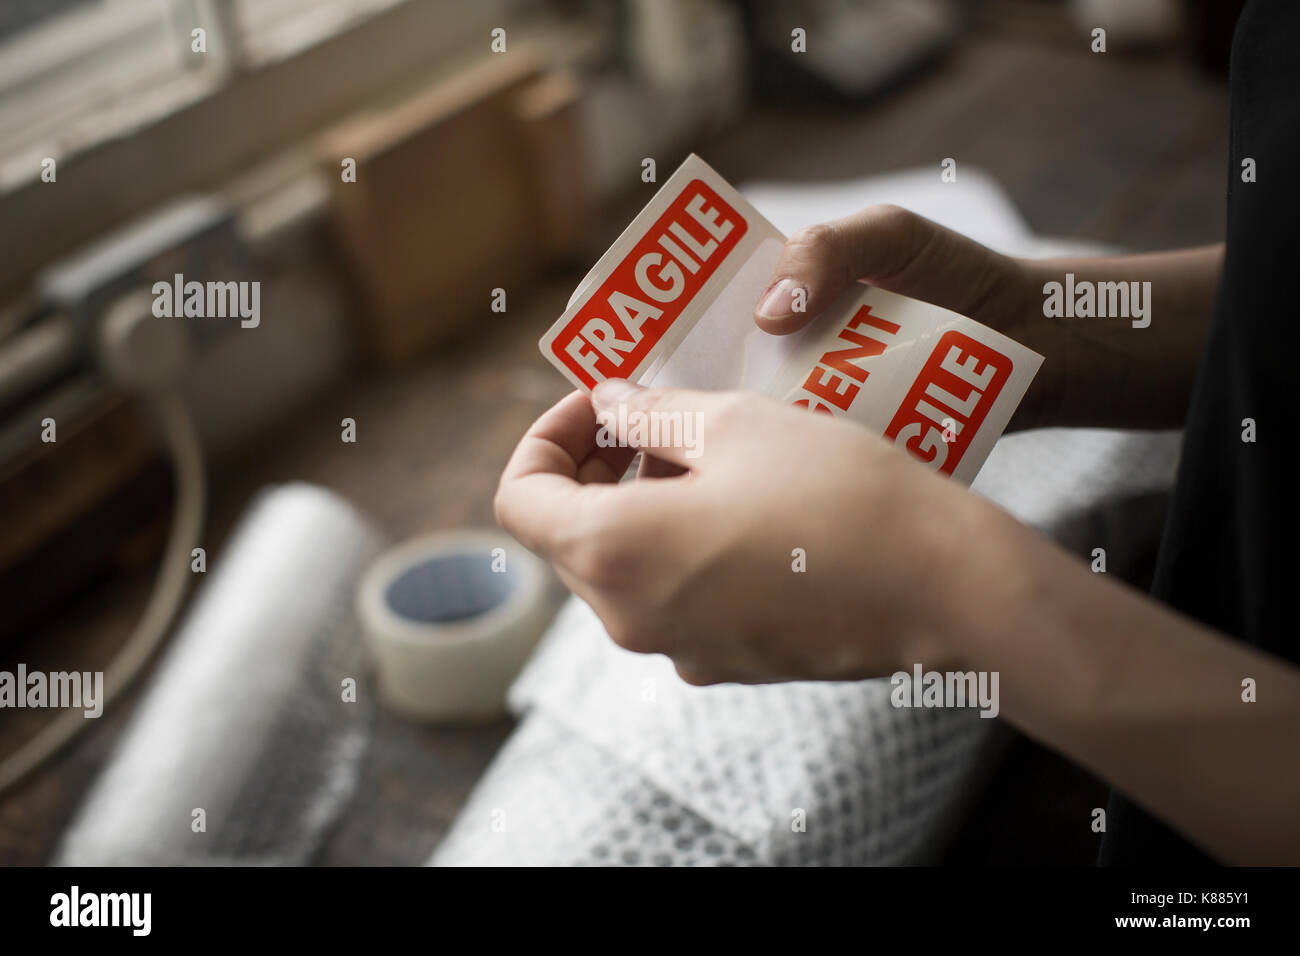 Hands holding a red Fragile sticker to stick it on a brown paper package on a work bench. Stock Photo